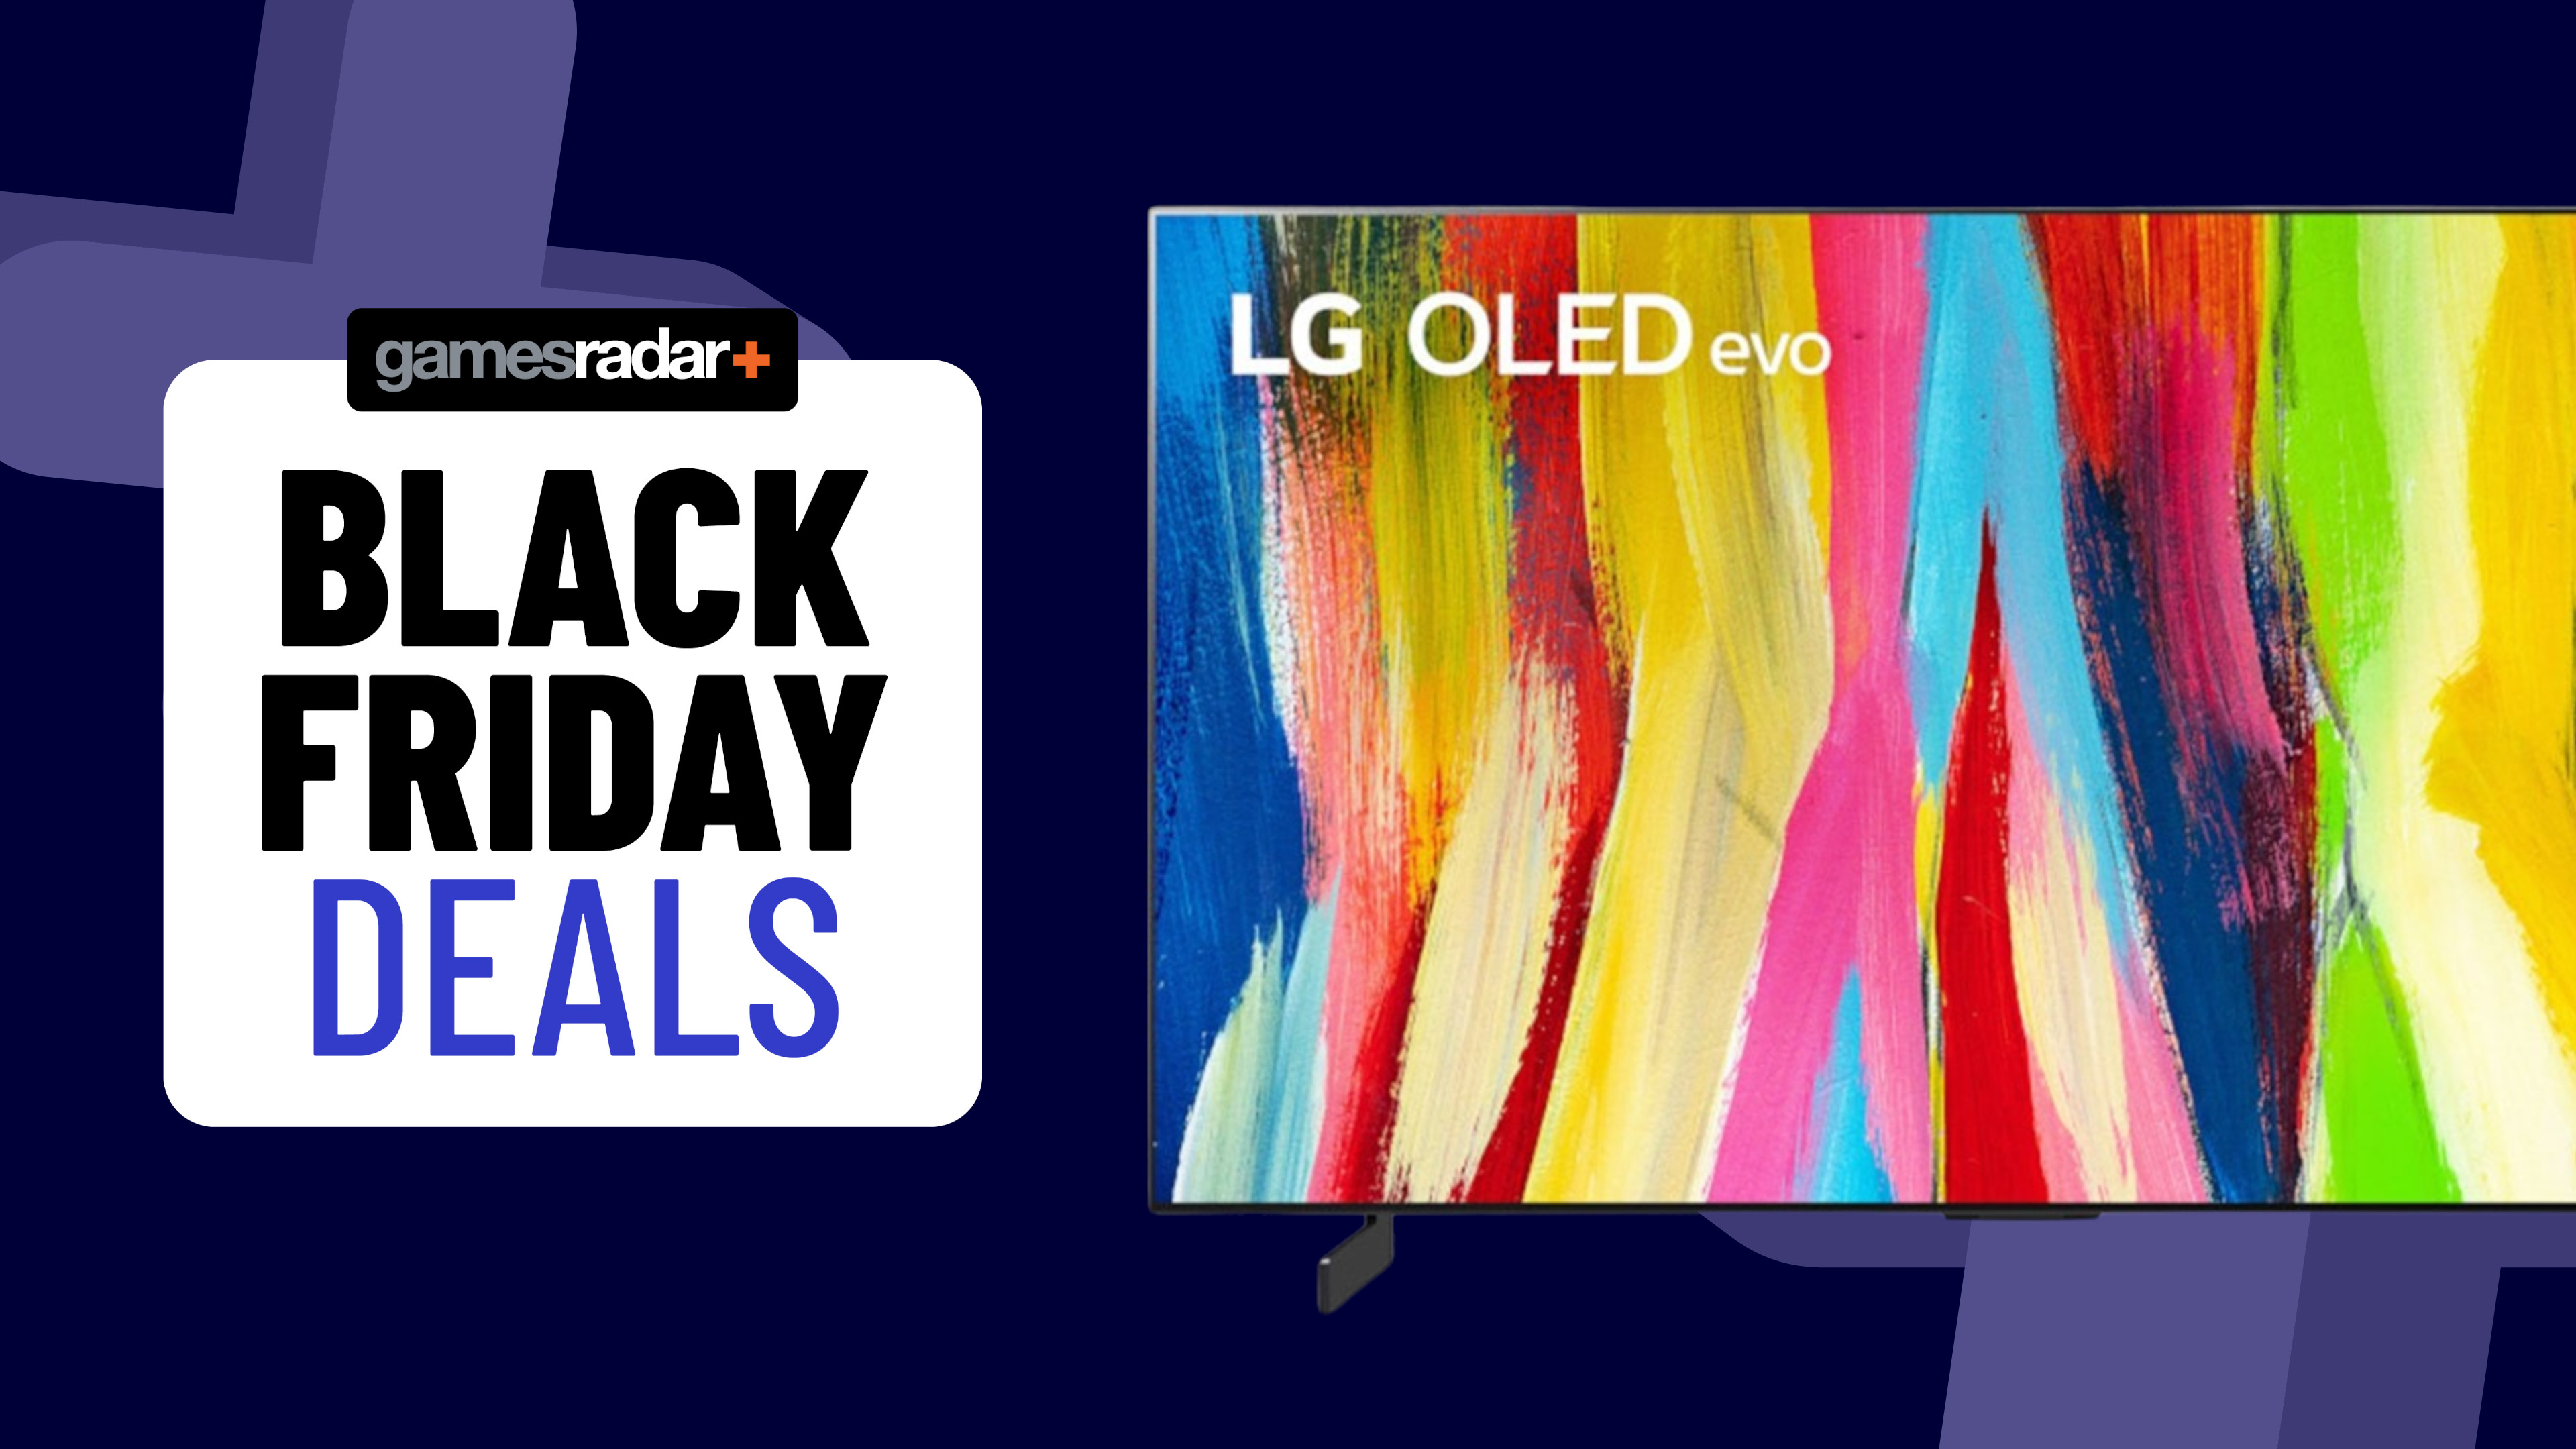 LG's 65-inch C3 is one of the best OLED TVs and it's at its lowest price  ahead of Black Friday